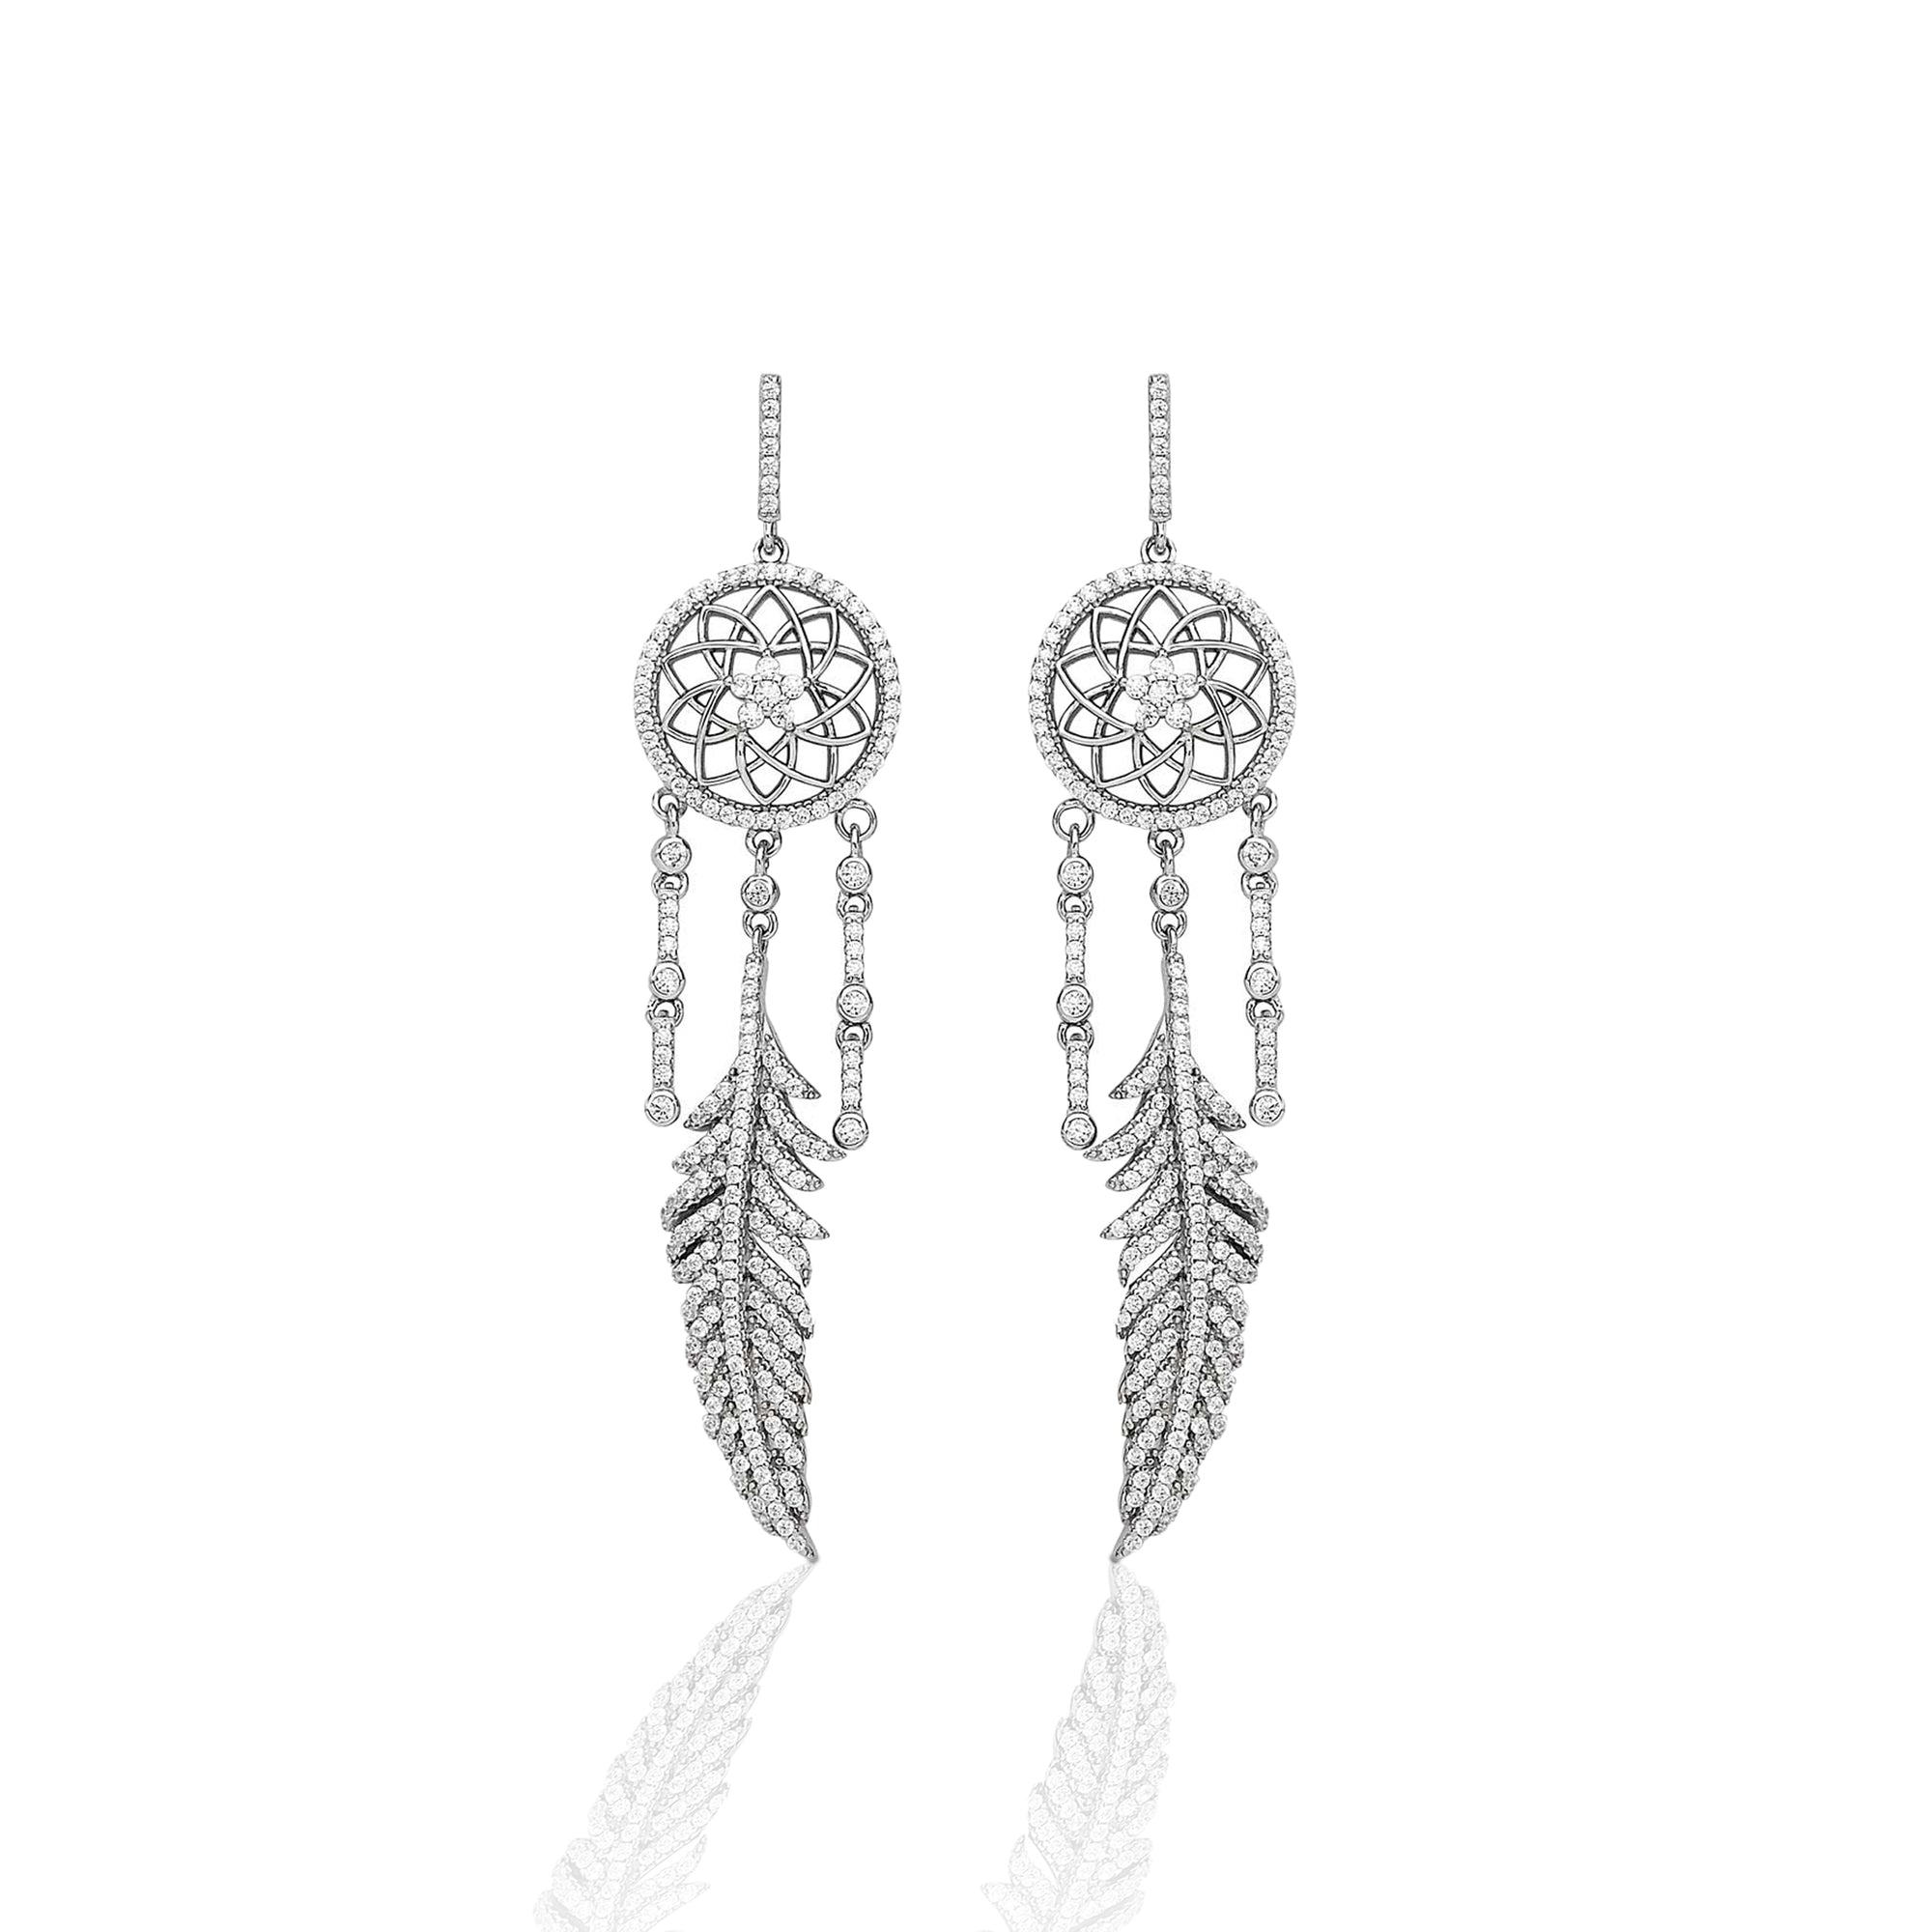 The traditional dream catcher is truly a symbol of the Southwest. We designed the Kelly Herd Dream Catcher Dangle Earrings to evoke that protective nature. Our design is accented with dazzling silver feathers and clear cubic zirconia stones. Make dreams come true by adding the matching necklace!     Features      Intricate Dream Catcher Design     Clear Cubic Zirconia Stones     Measures 55mm high and 20mm wide     Post Back     Sterling Silver